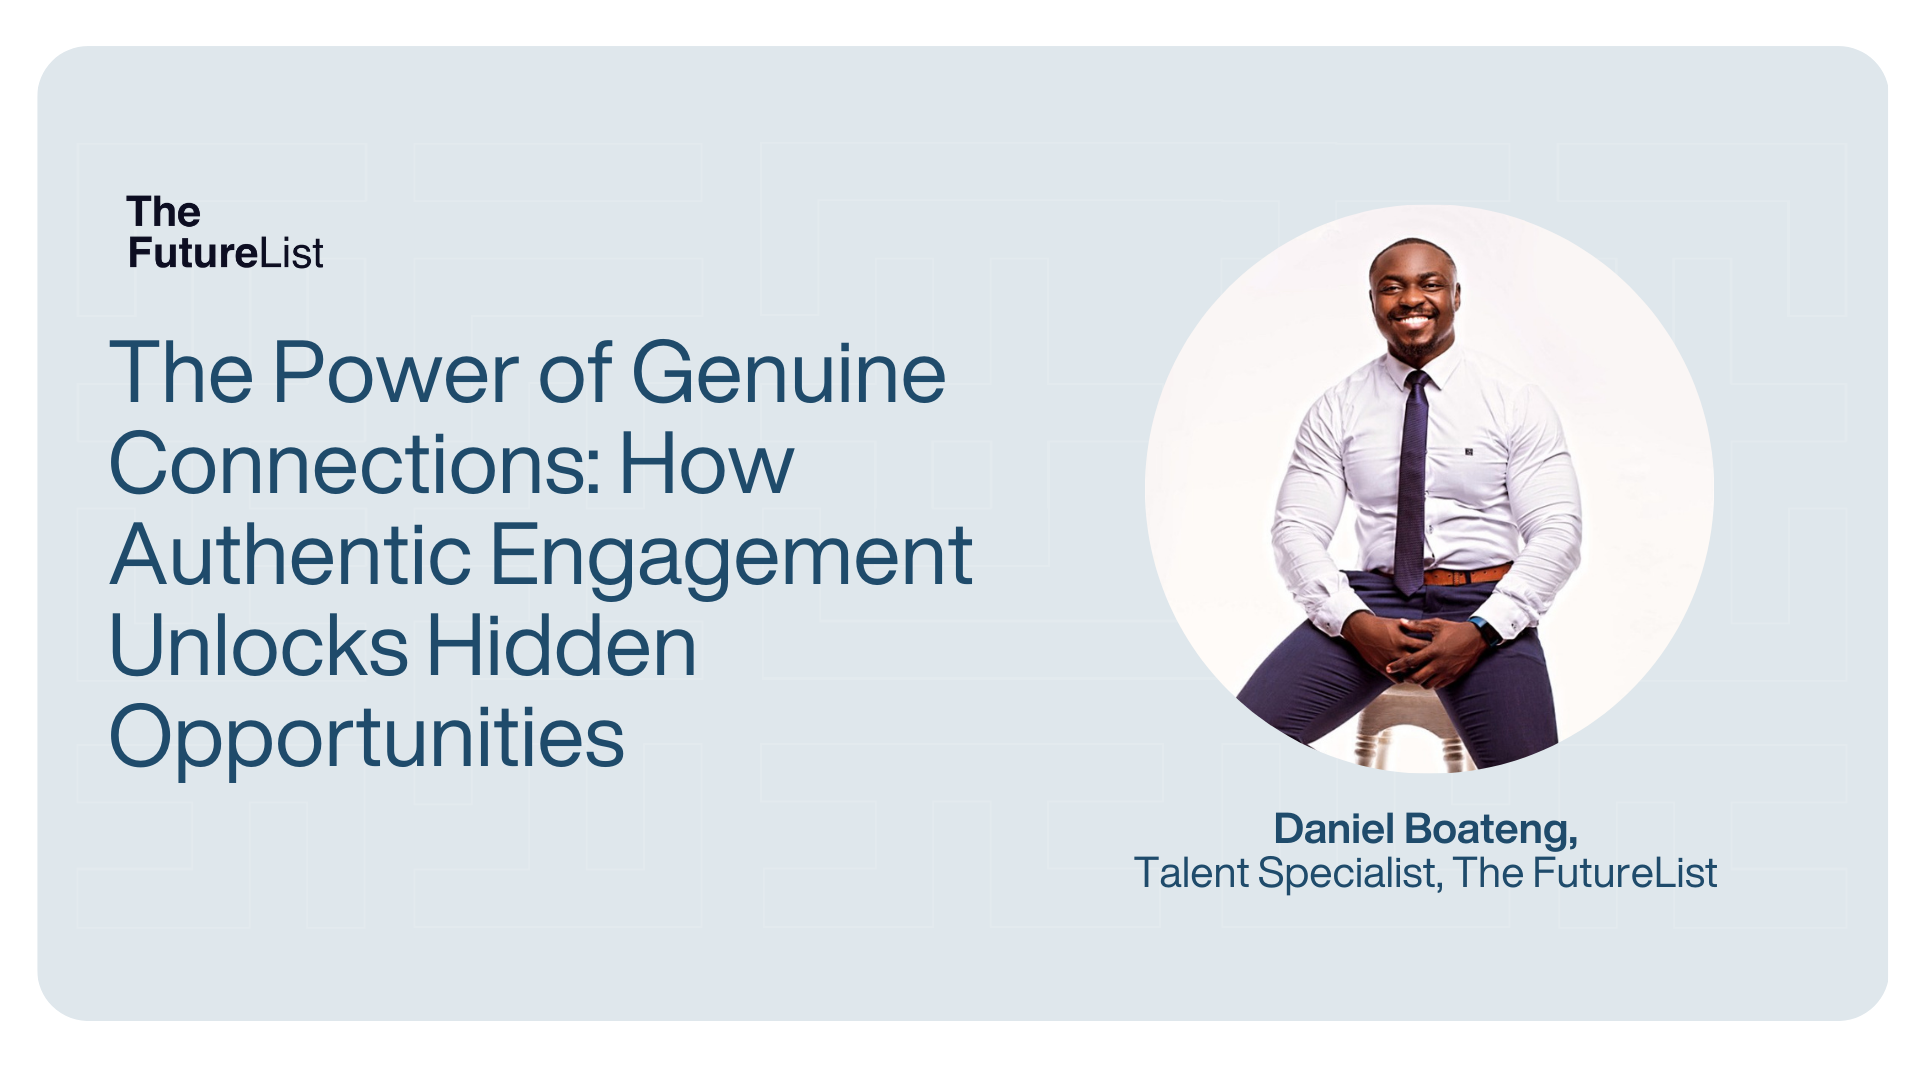 The power of genuine connections in talent retention